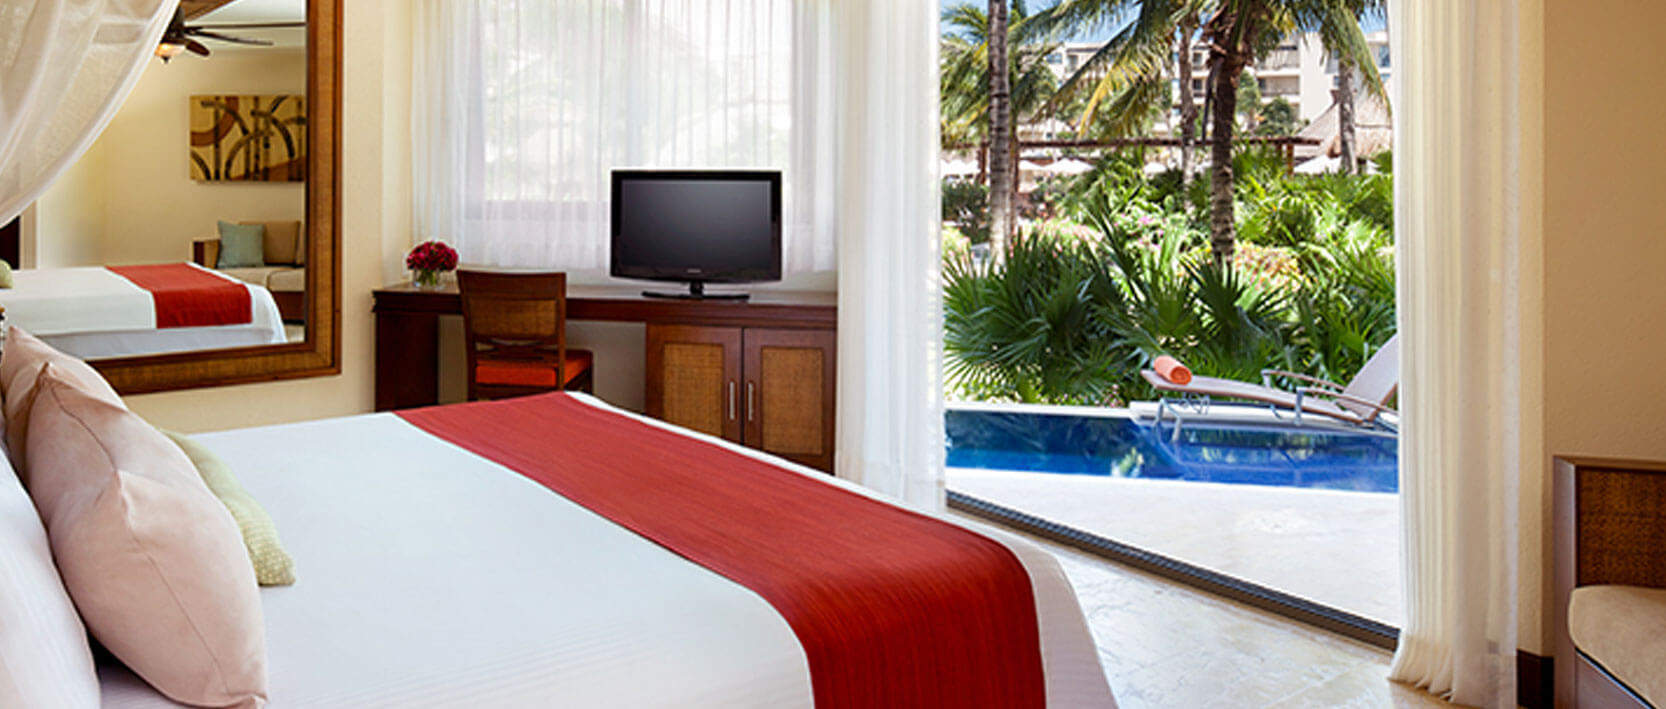 Dreams Riviera Cancun Resort Accommodations - Premium Deluxe with Plunge Pool